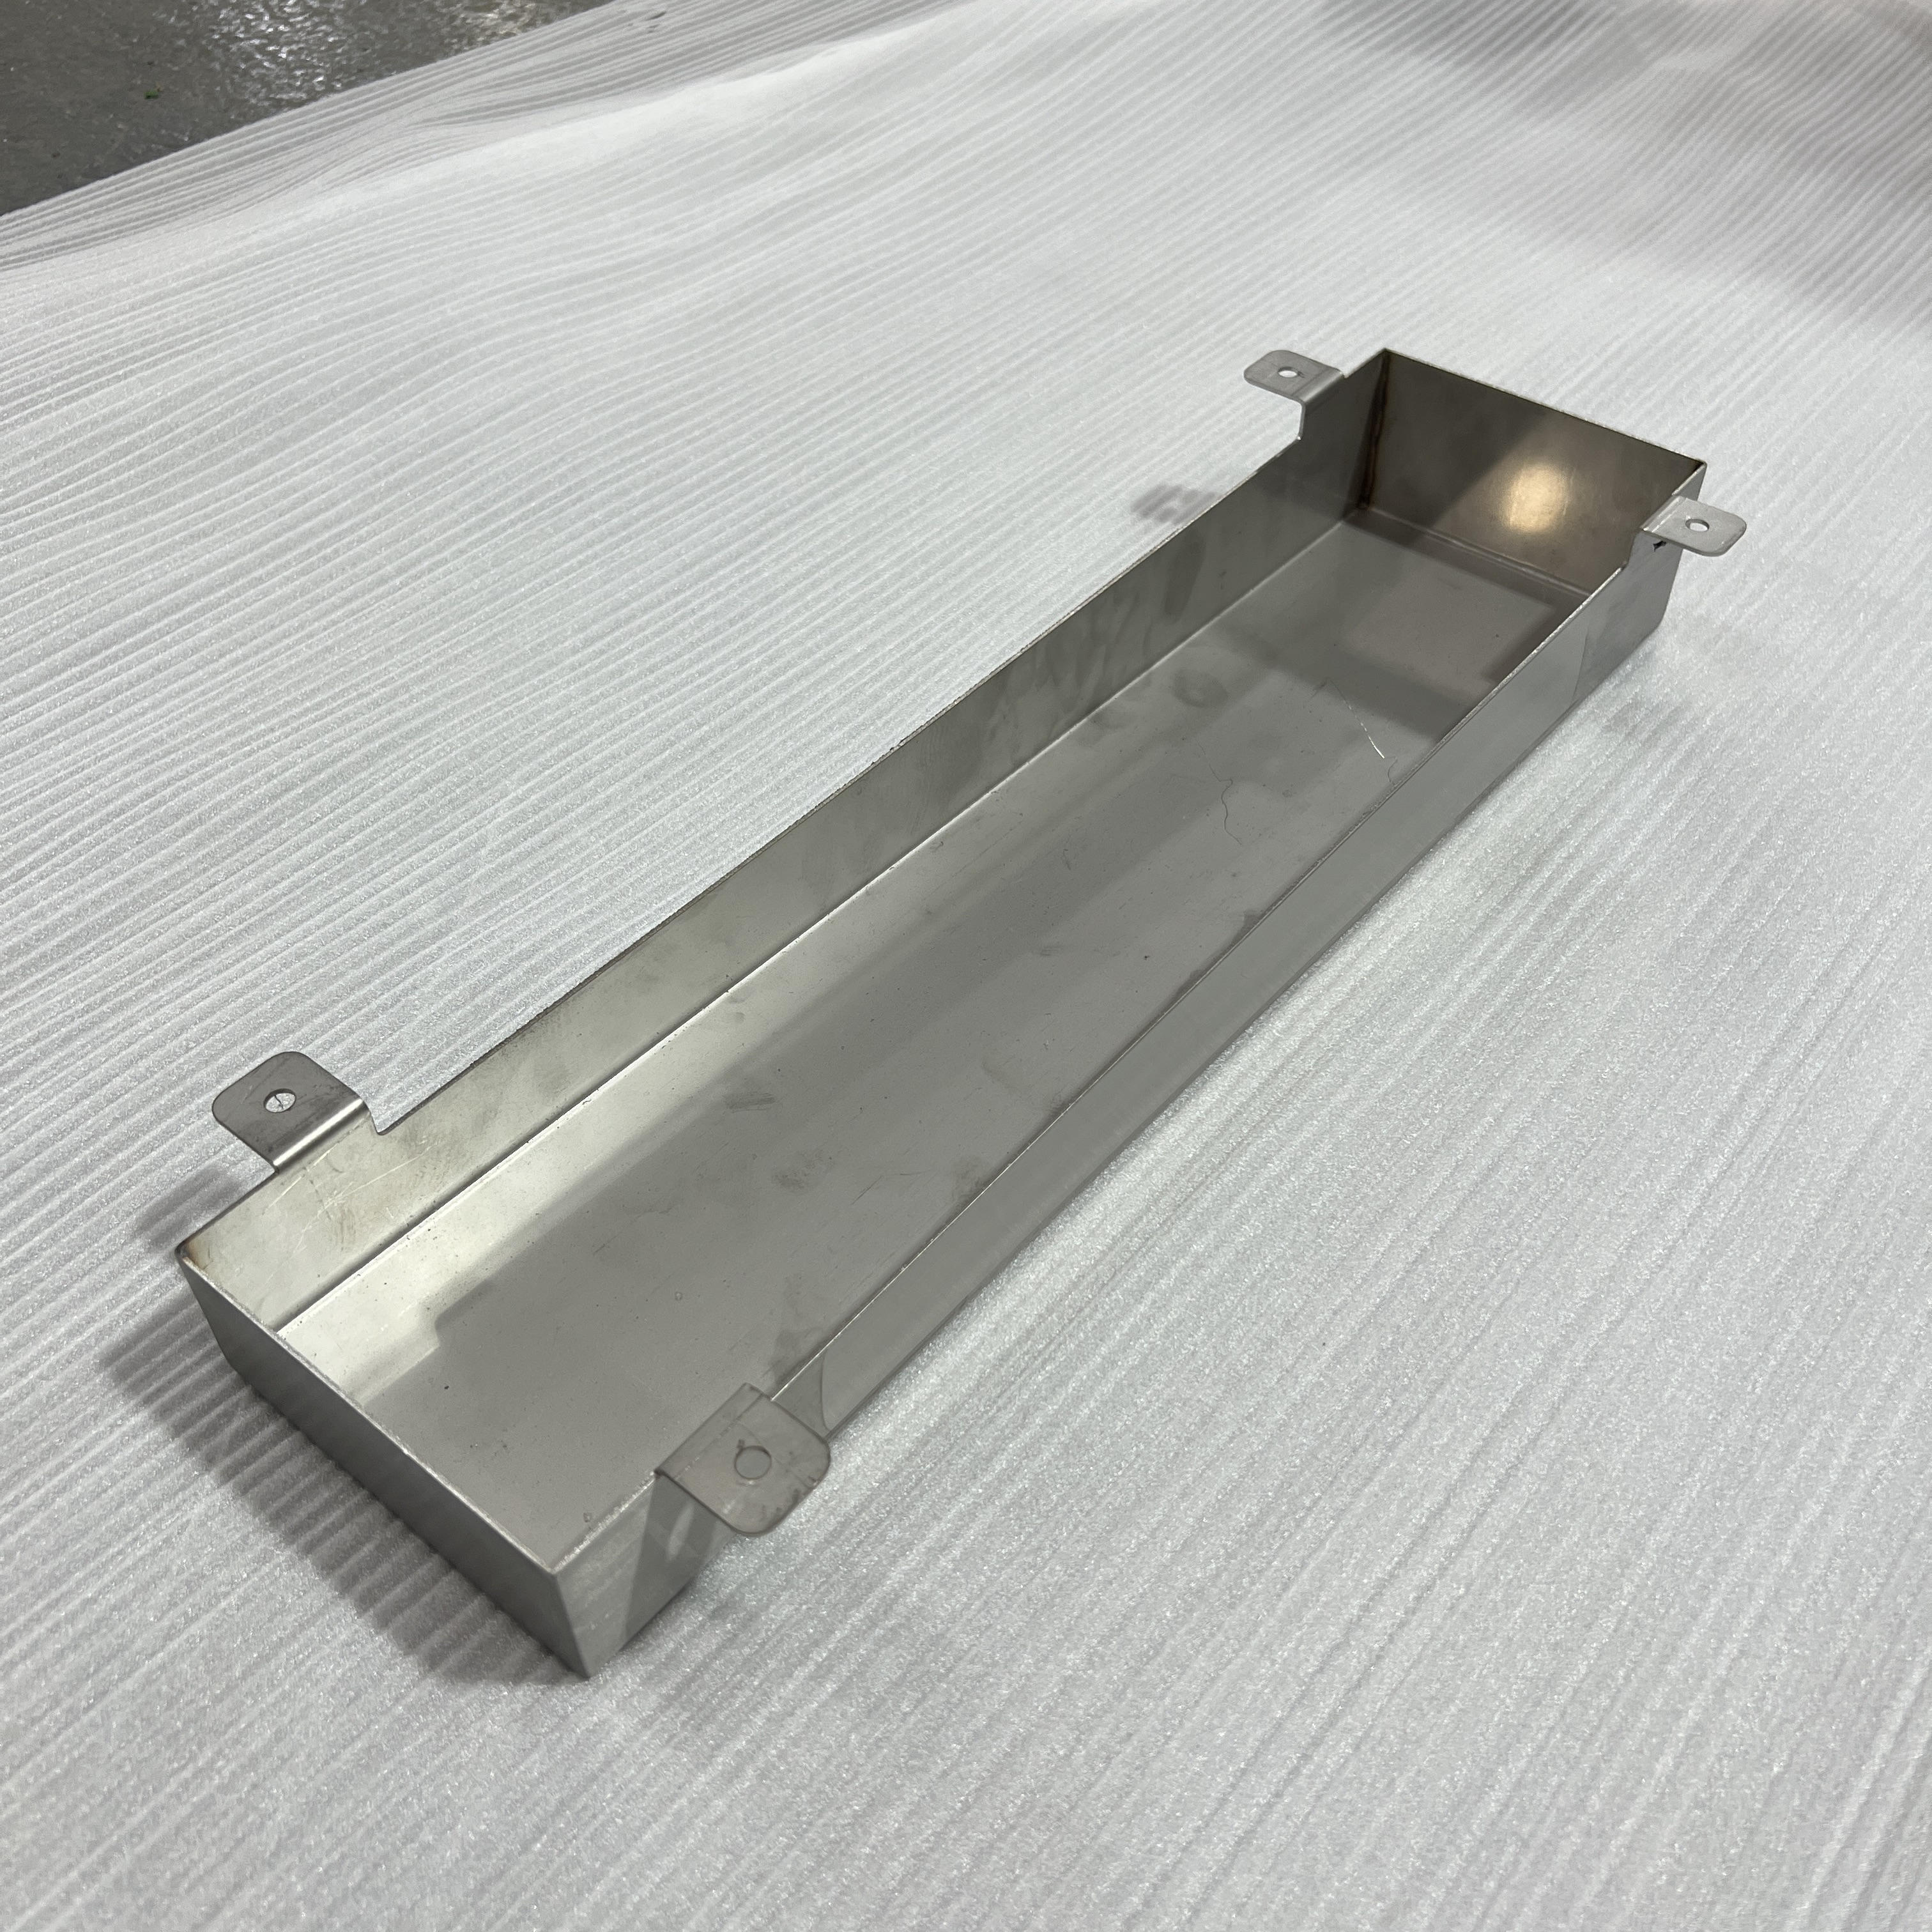 Non-Standard Welding Sheet Metal Stamping Chassis Base Stainless Steel Laser Cutting